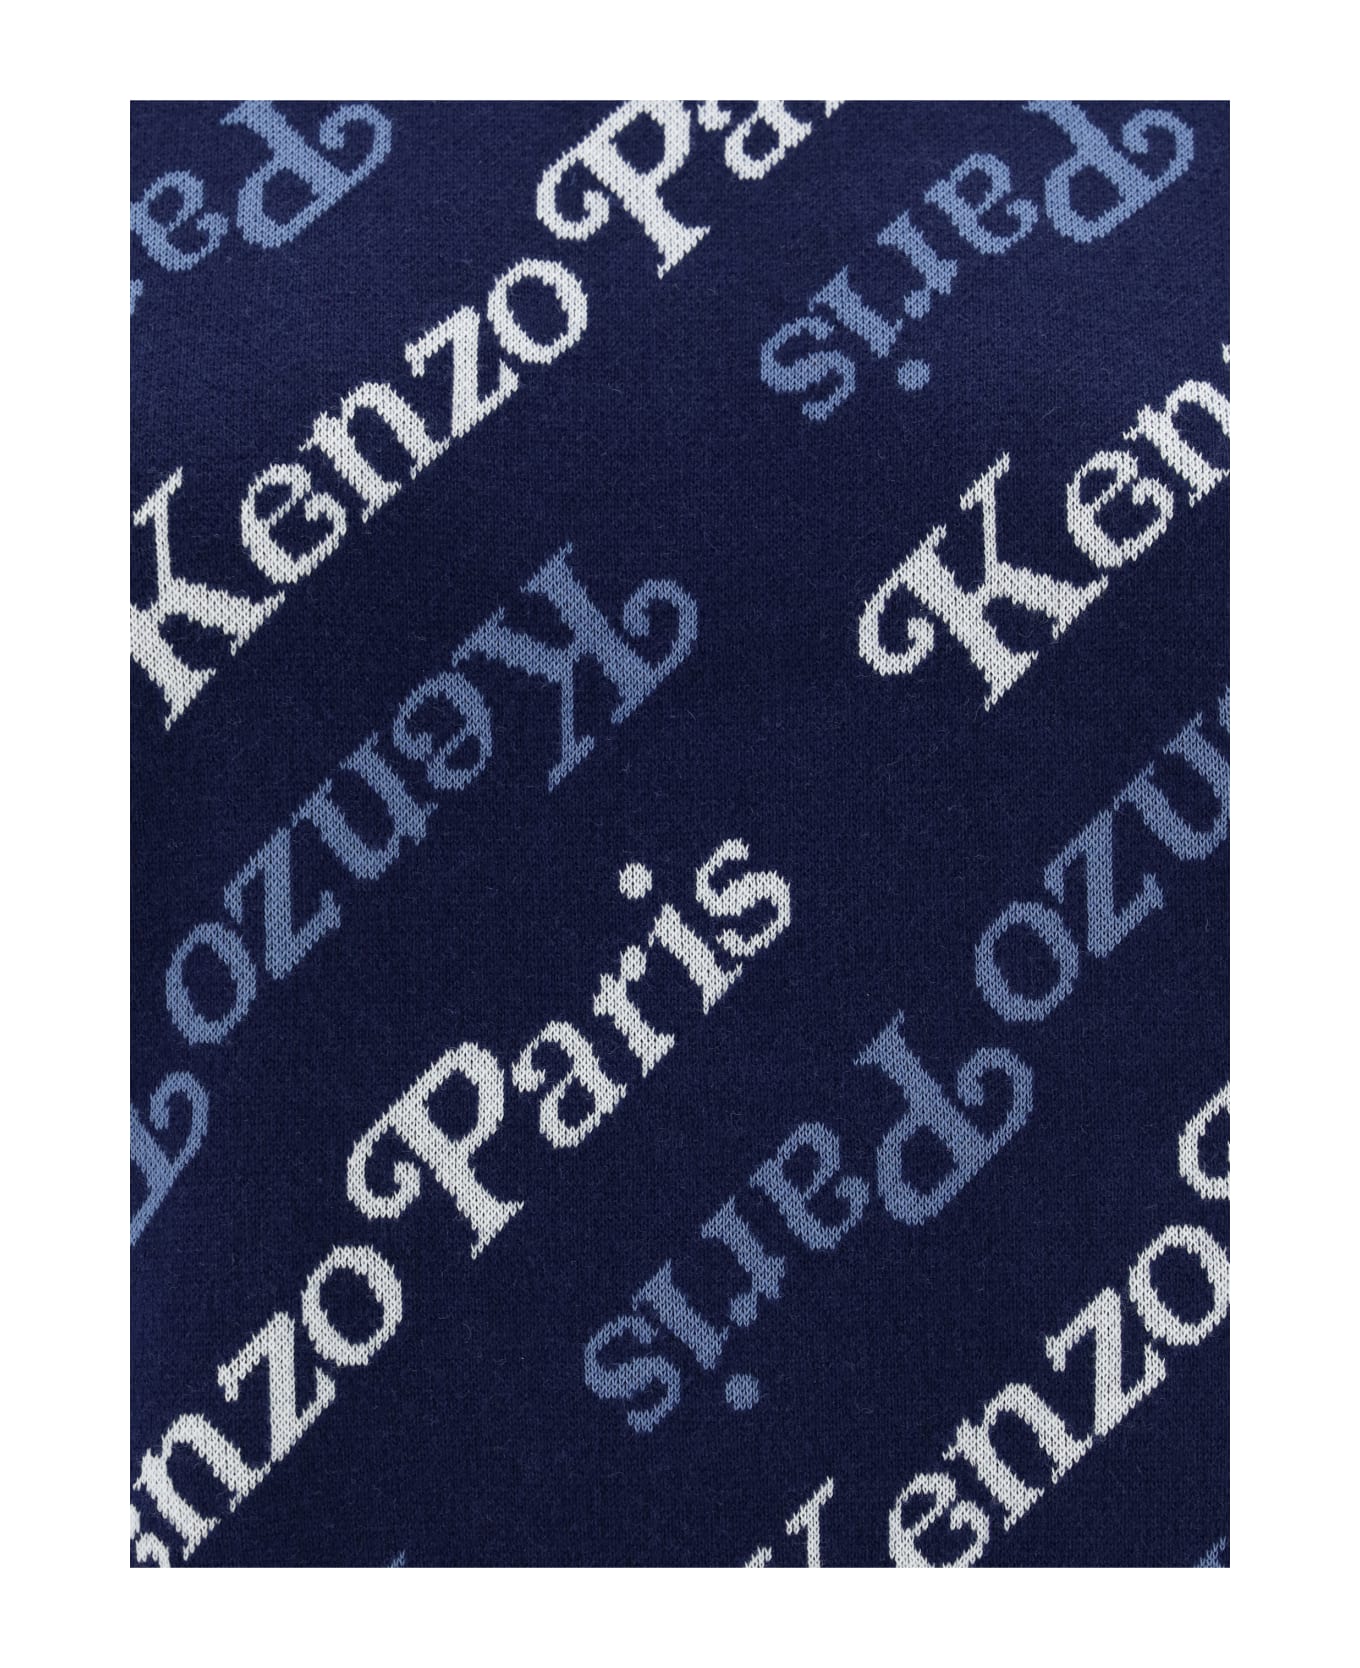 Kenzo All Over Logo Sweater - Midnight Blue